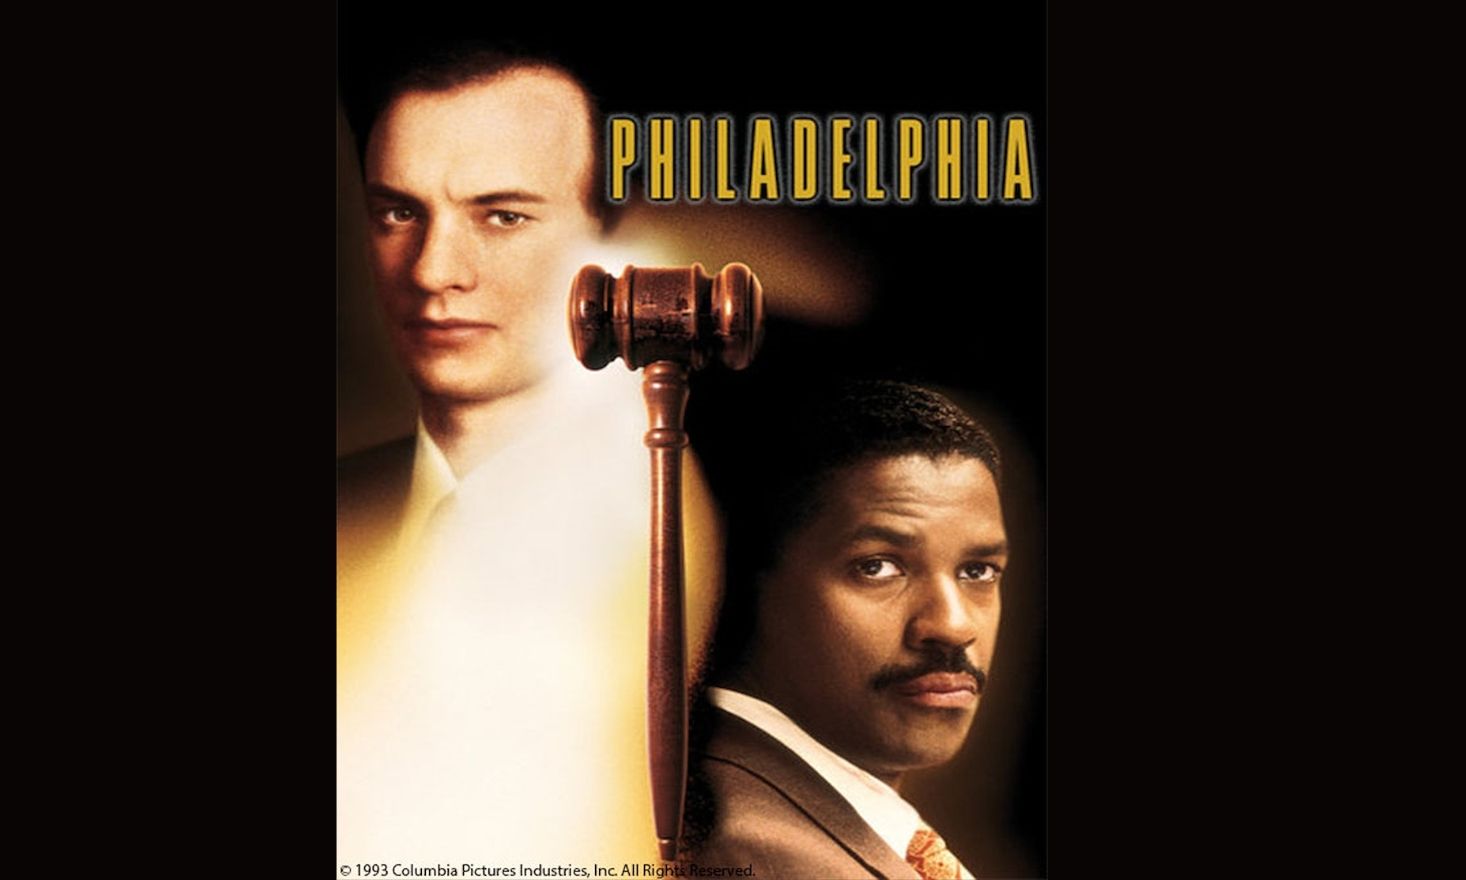 Movie poster for "Philadelphia" images of Tom Hanks and Denzel Washington's characters